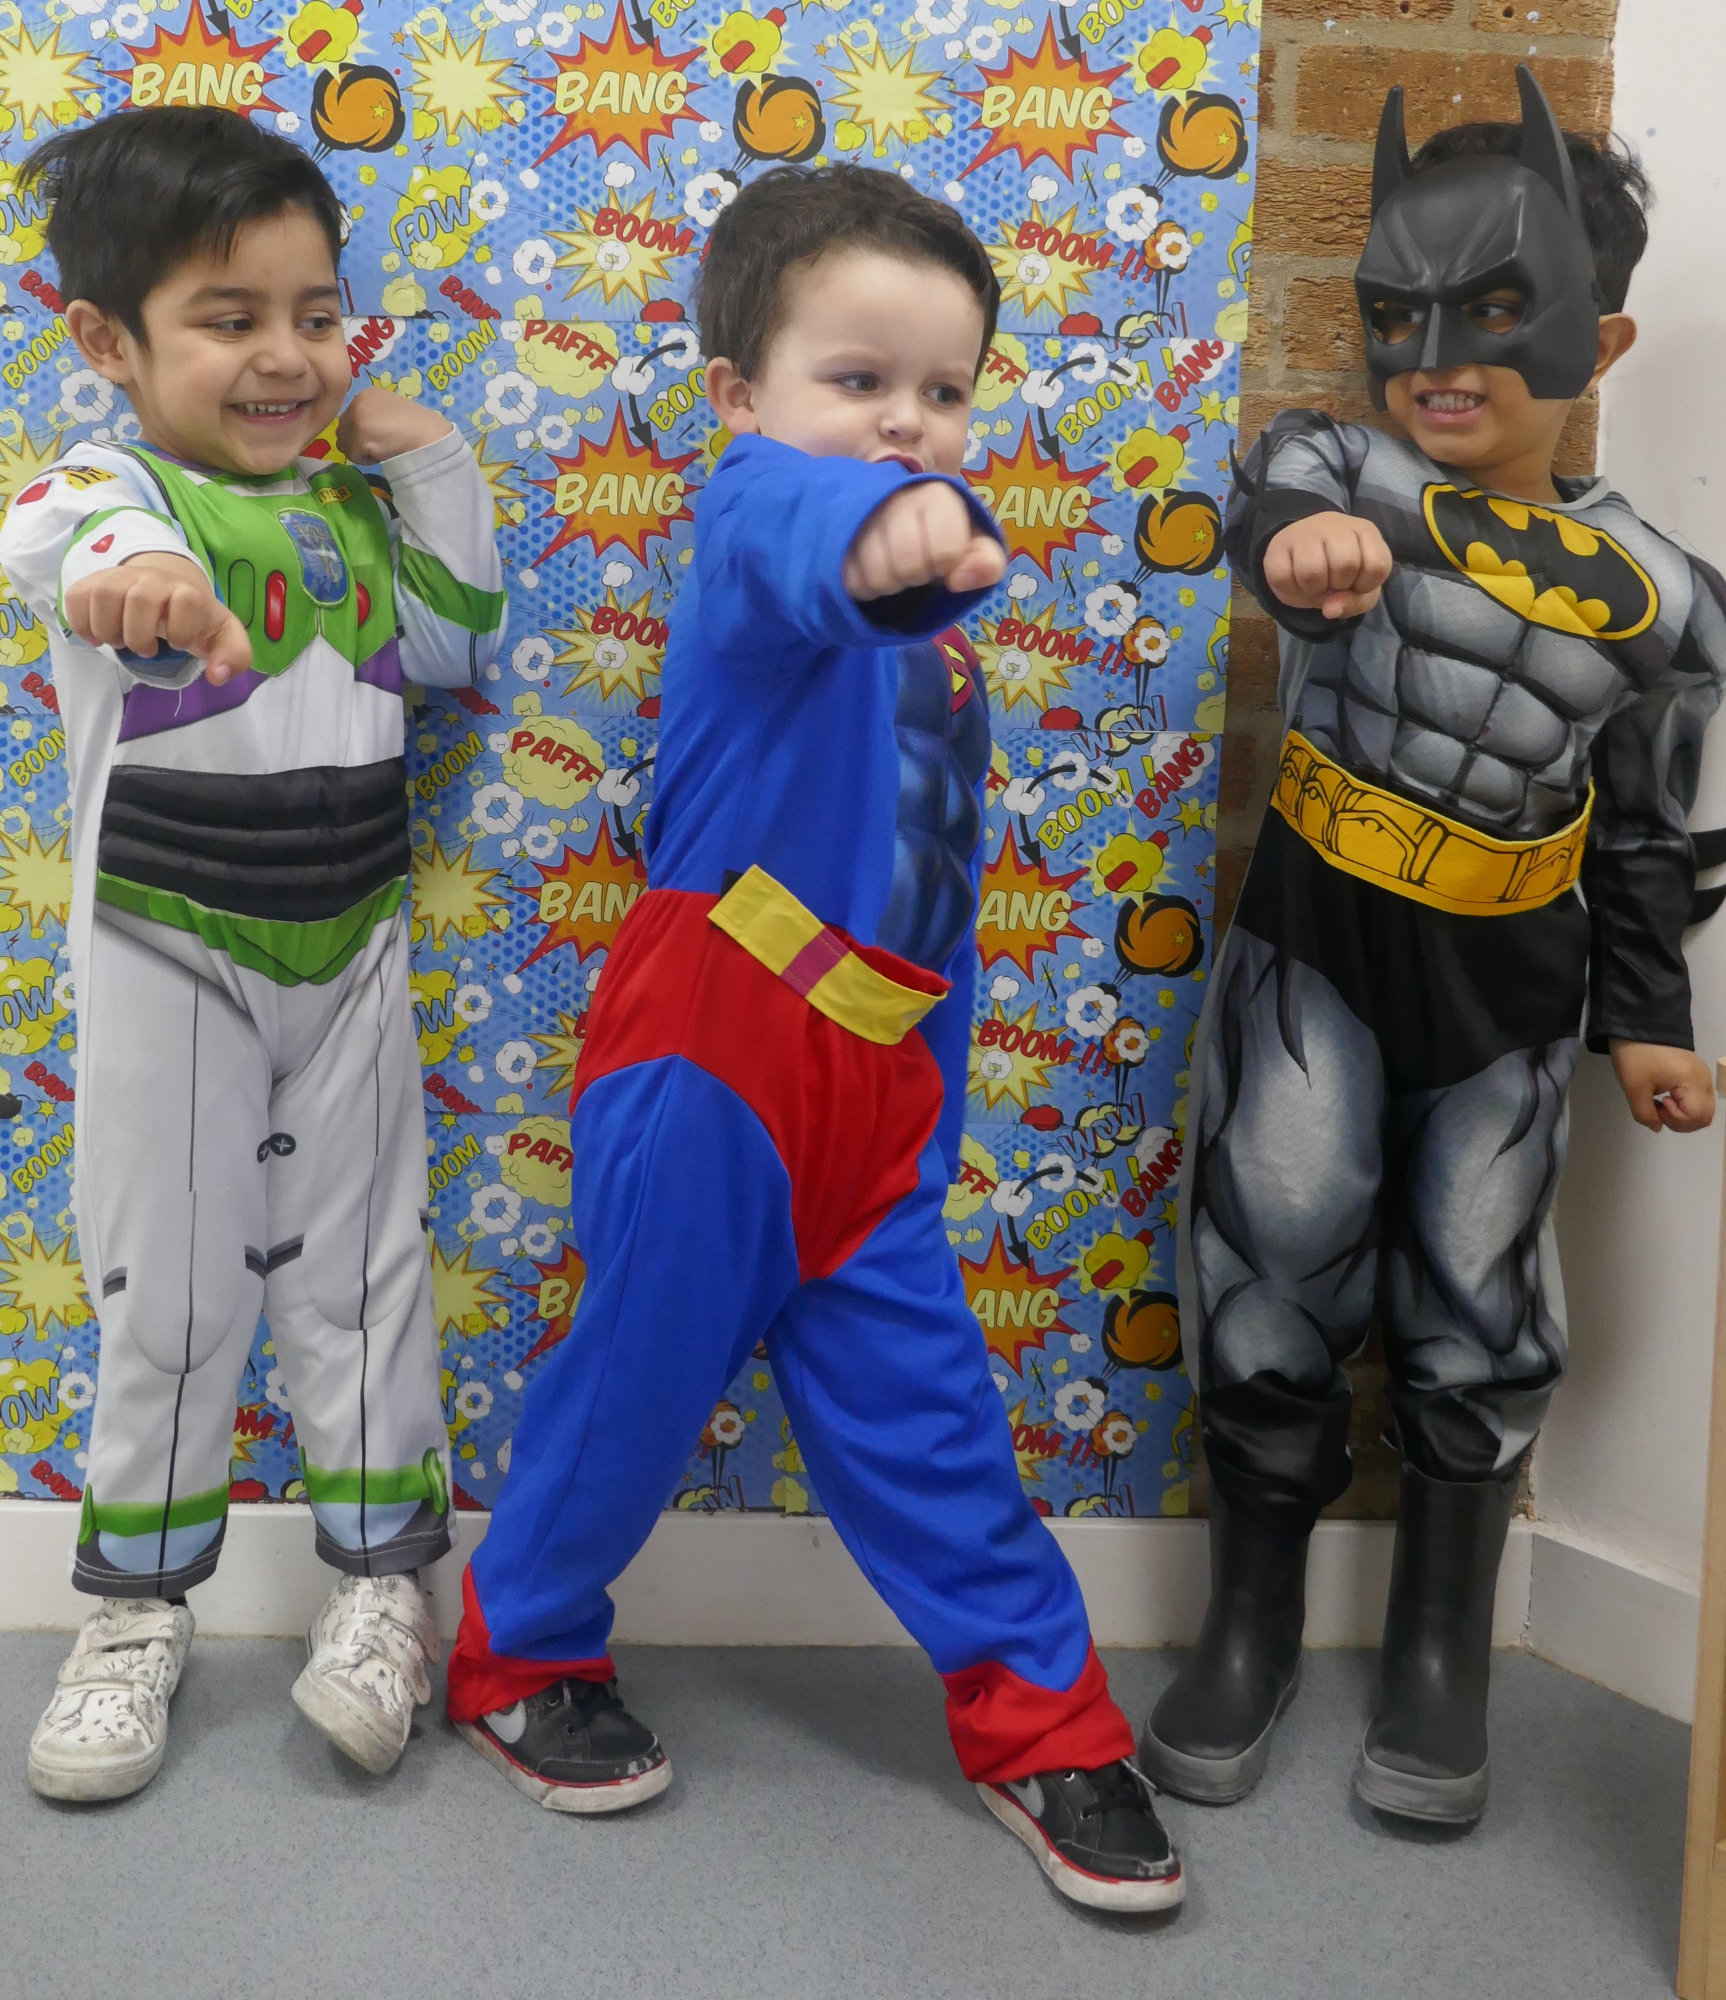 Children dressed up as super heroes